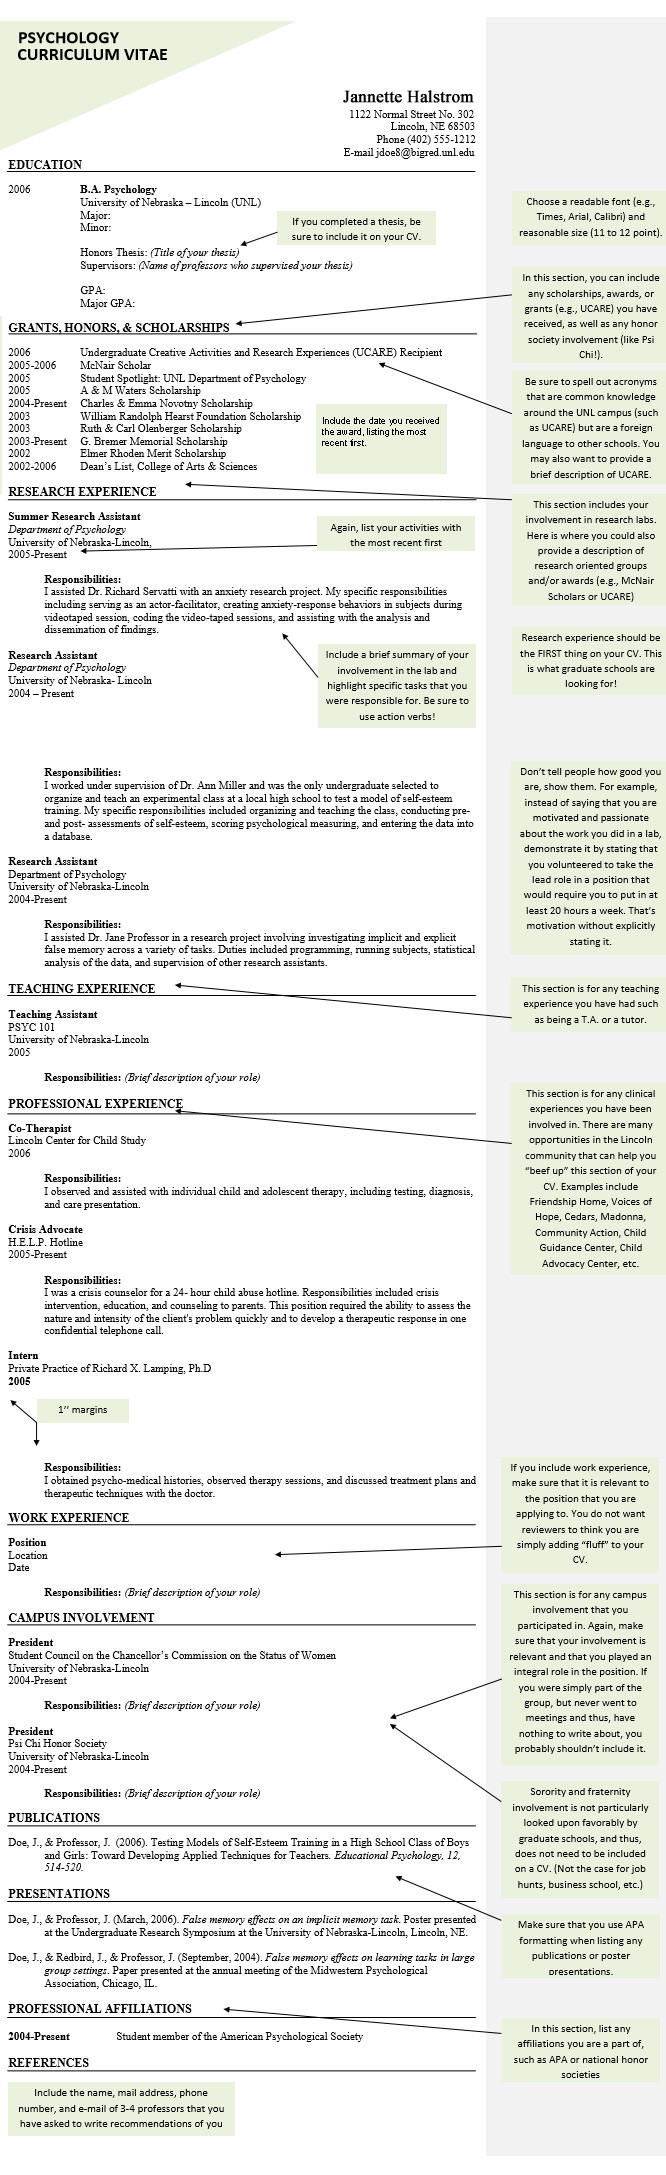 Sample Resume for A Psychology Graduate Psychology Cv and Resume Samples, Templates and Tips